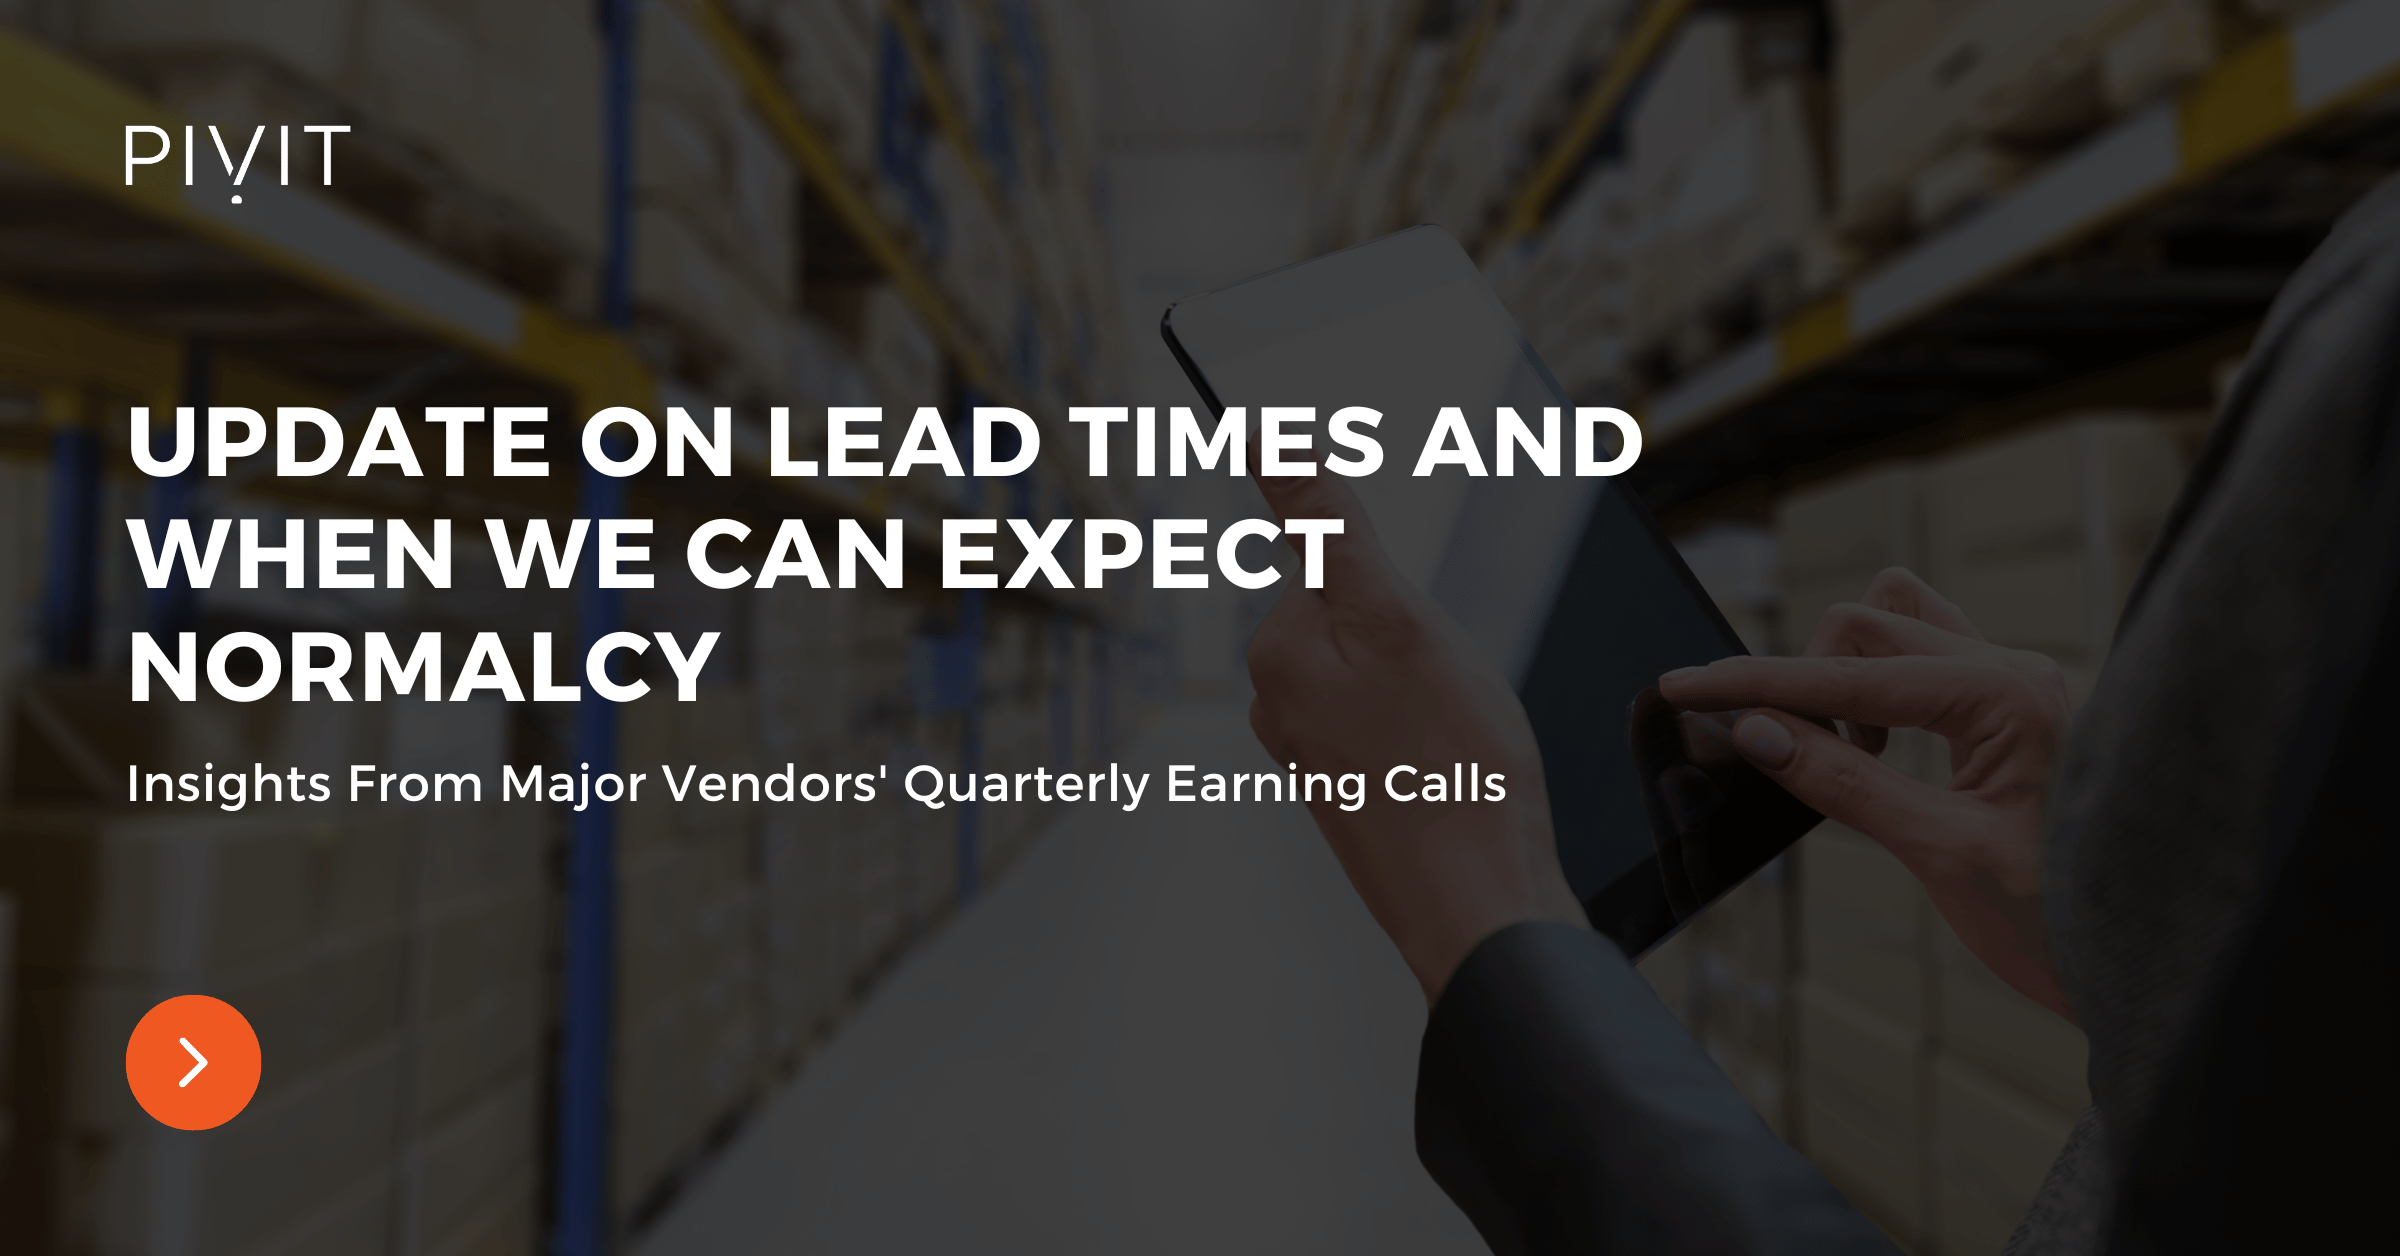 Update on Lead Times and When We Can Expect Normalcy - Insights From Major Vendors' Quarterly Earning Calls